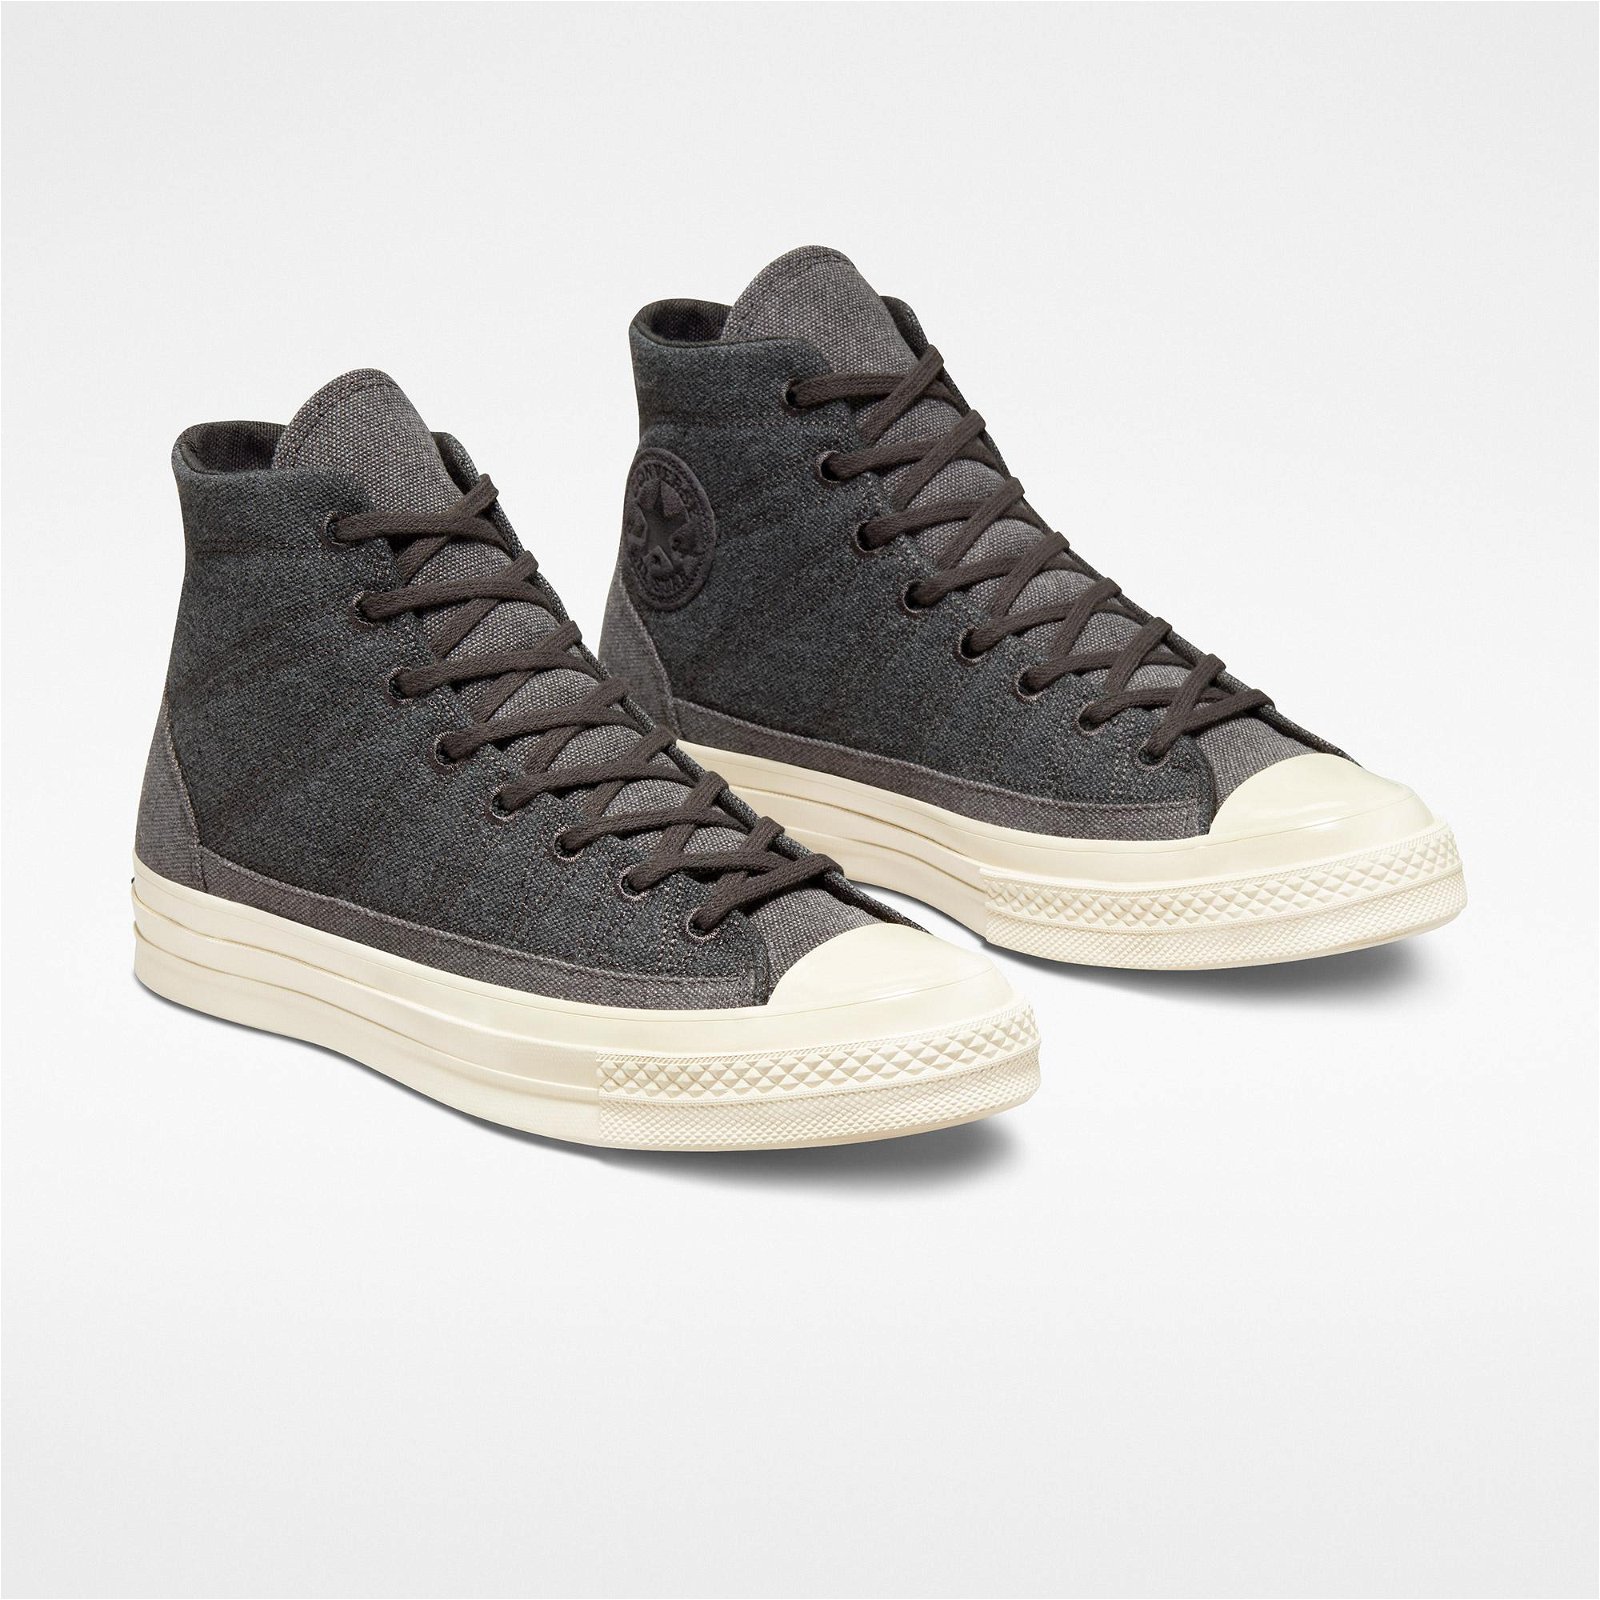 Converse Chuck 70 Hiking Stitched Canvas High Unisex Siyah Sneaker